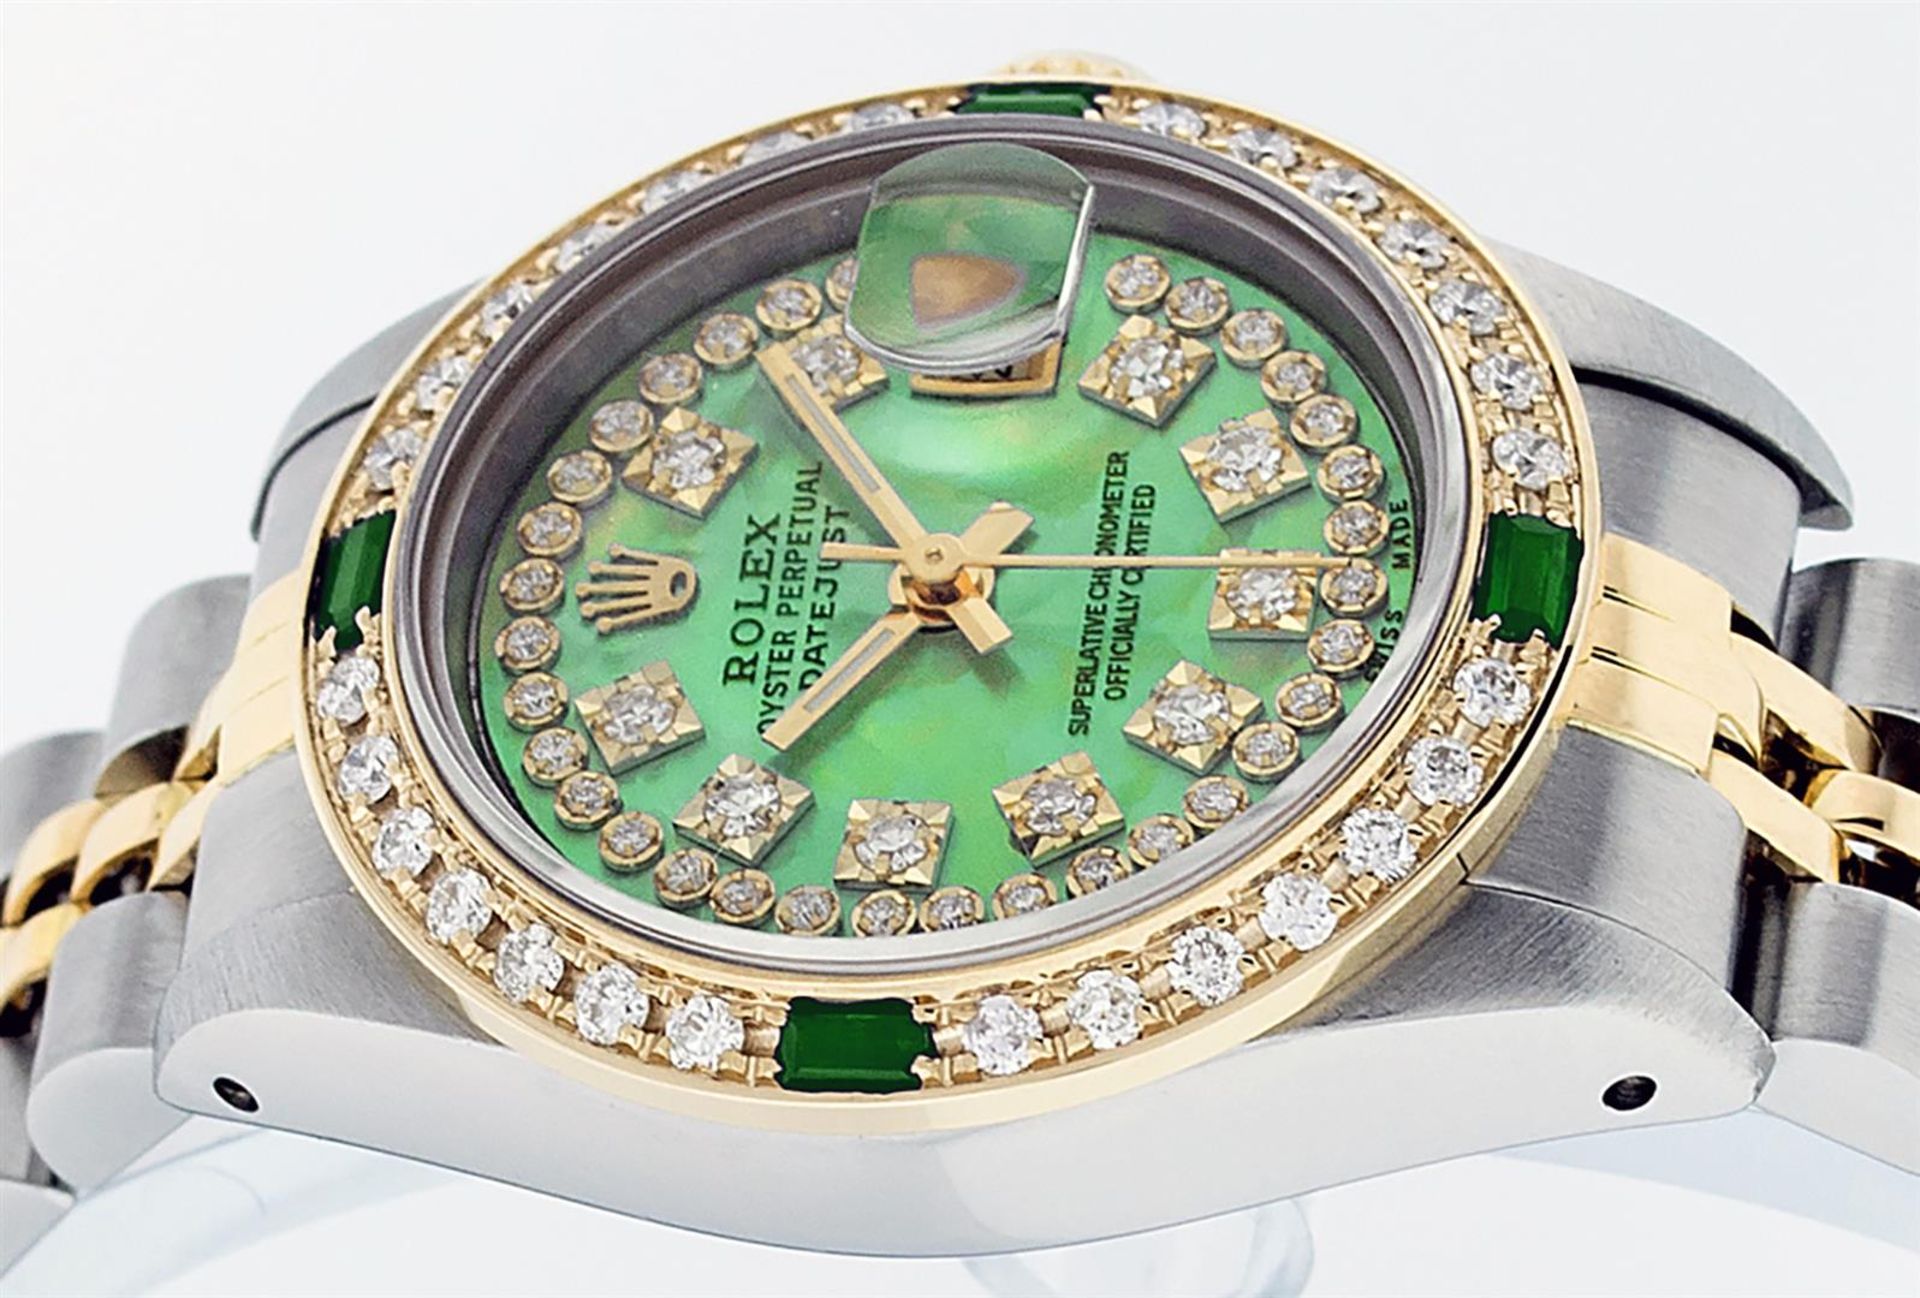 Rolex Ladies 26 Green String Diamond & Emerald Datejust Oyster Perpetual - Image 5 of 9